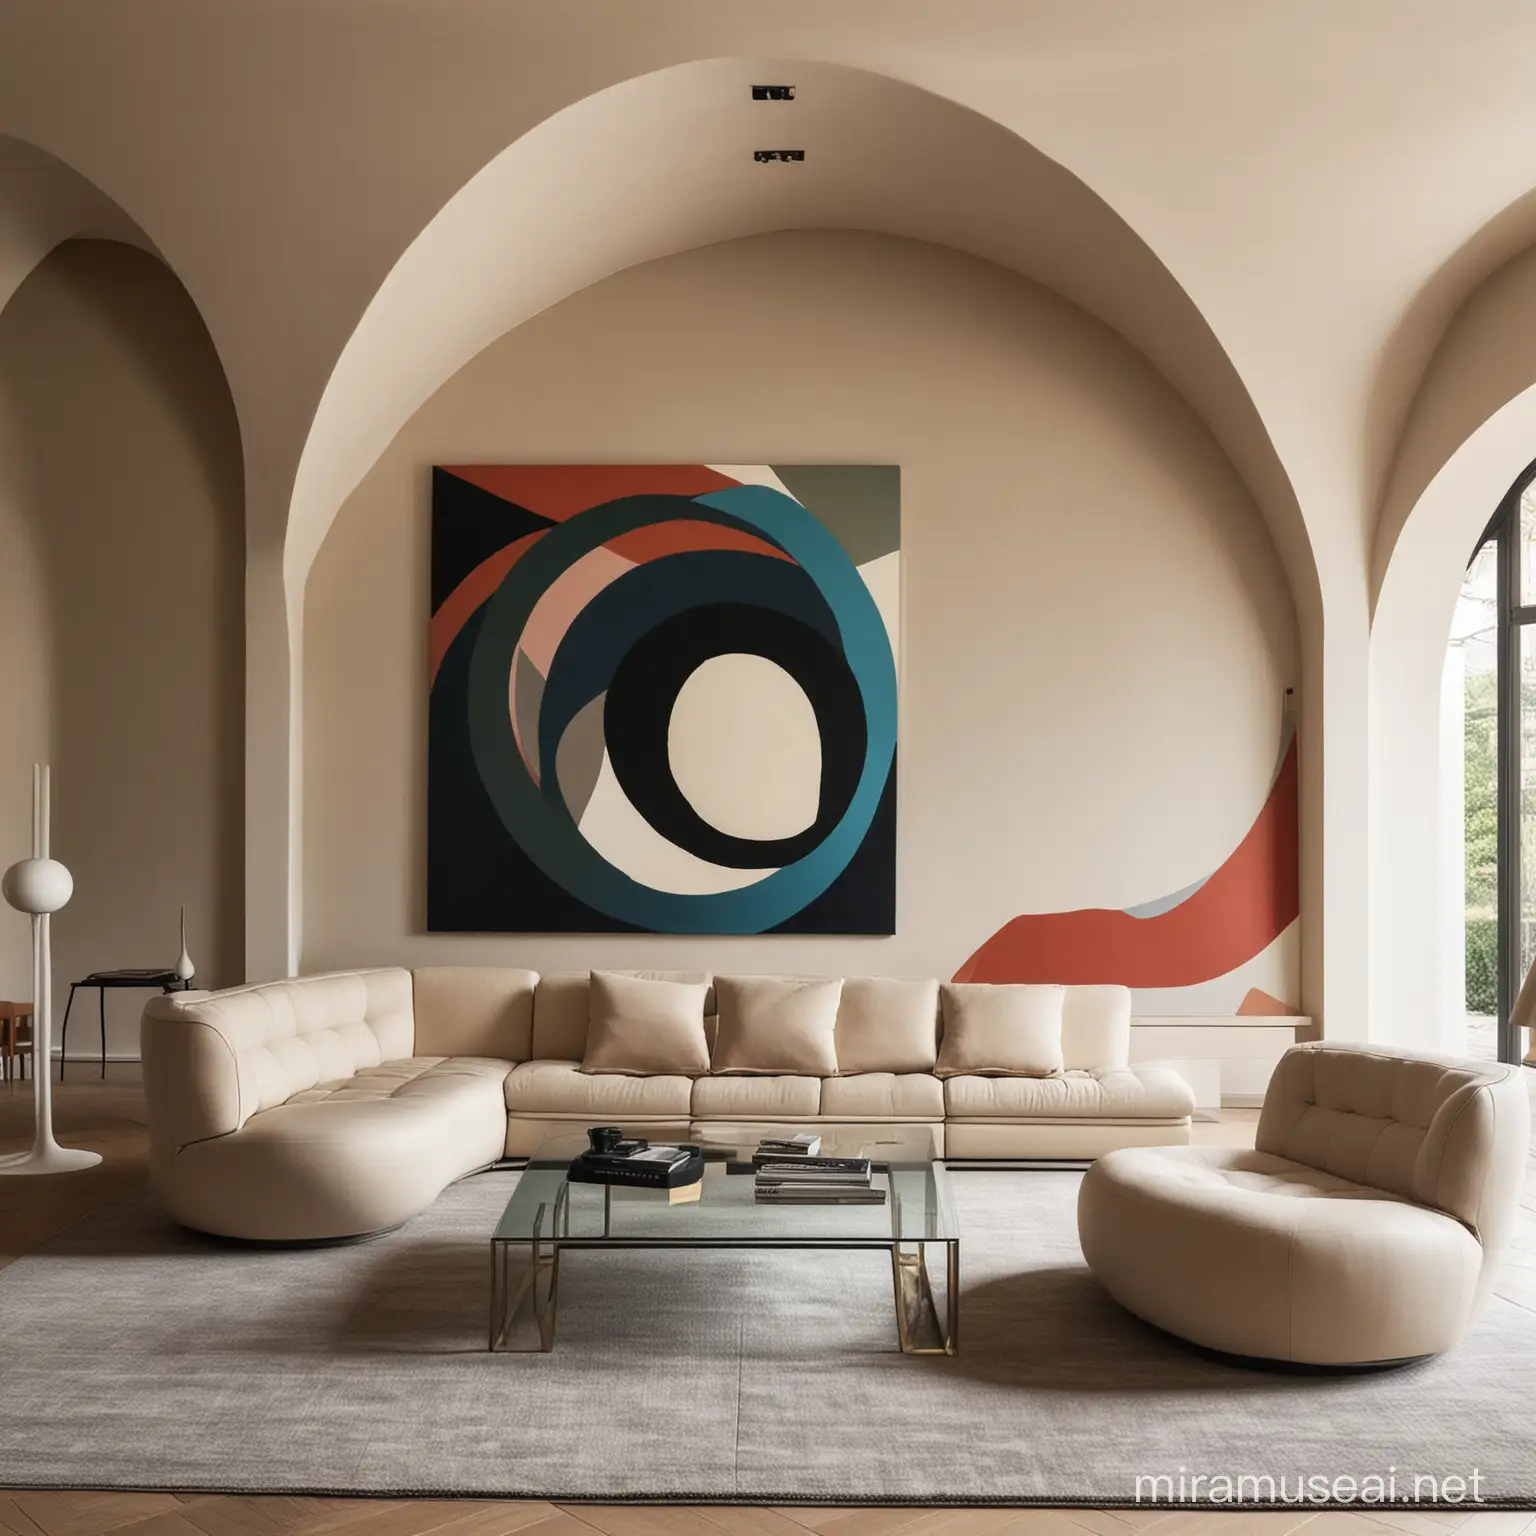 #geometric artwork #arch #interiores #ad #parisstyle#Cinema room
#collectiontwentyseven #vladimirkagan
#pierrejeanneret #charlotteperriand
#dianaghandourstudio #zahahadid #gubiofficial
#paulinpaulinpaulin #cctapis #atelierfevrier
#lecorbusier #archlovers #architecturedesigr
#theinvisiblecollection #nycphotographer #nycvibes
#parisvibes #londonvibes #artgallery
#quotesaboutlife #artist #interiordecoration
#cassina #tacchini